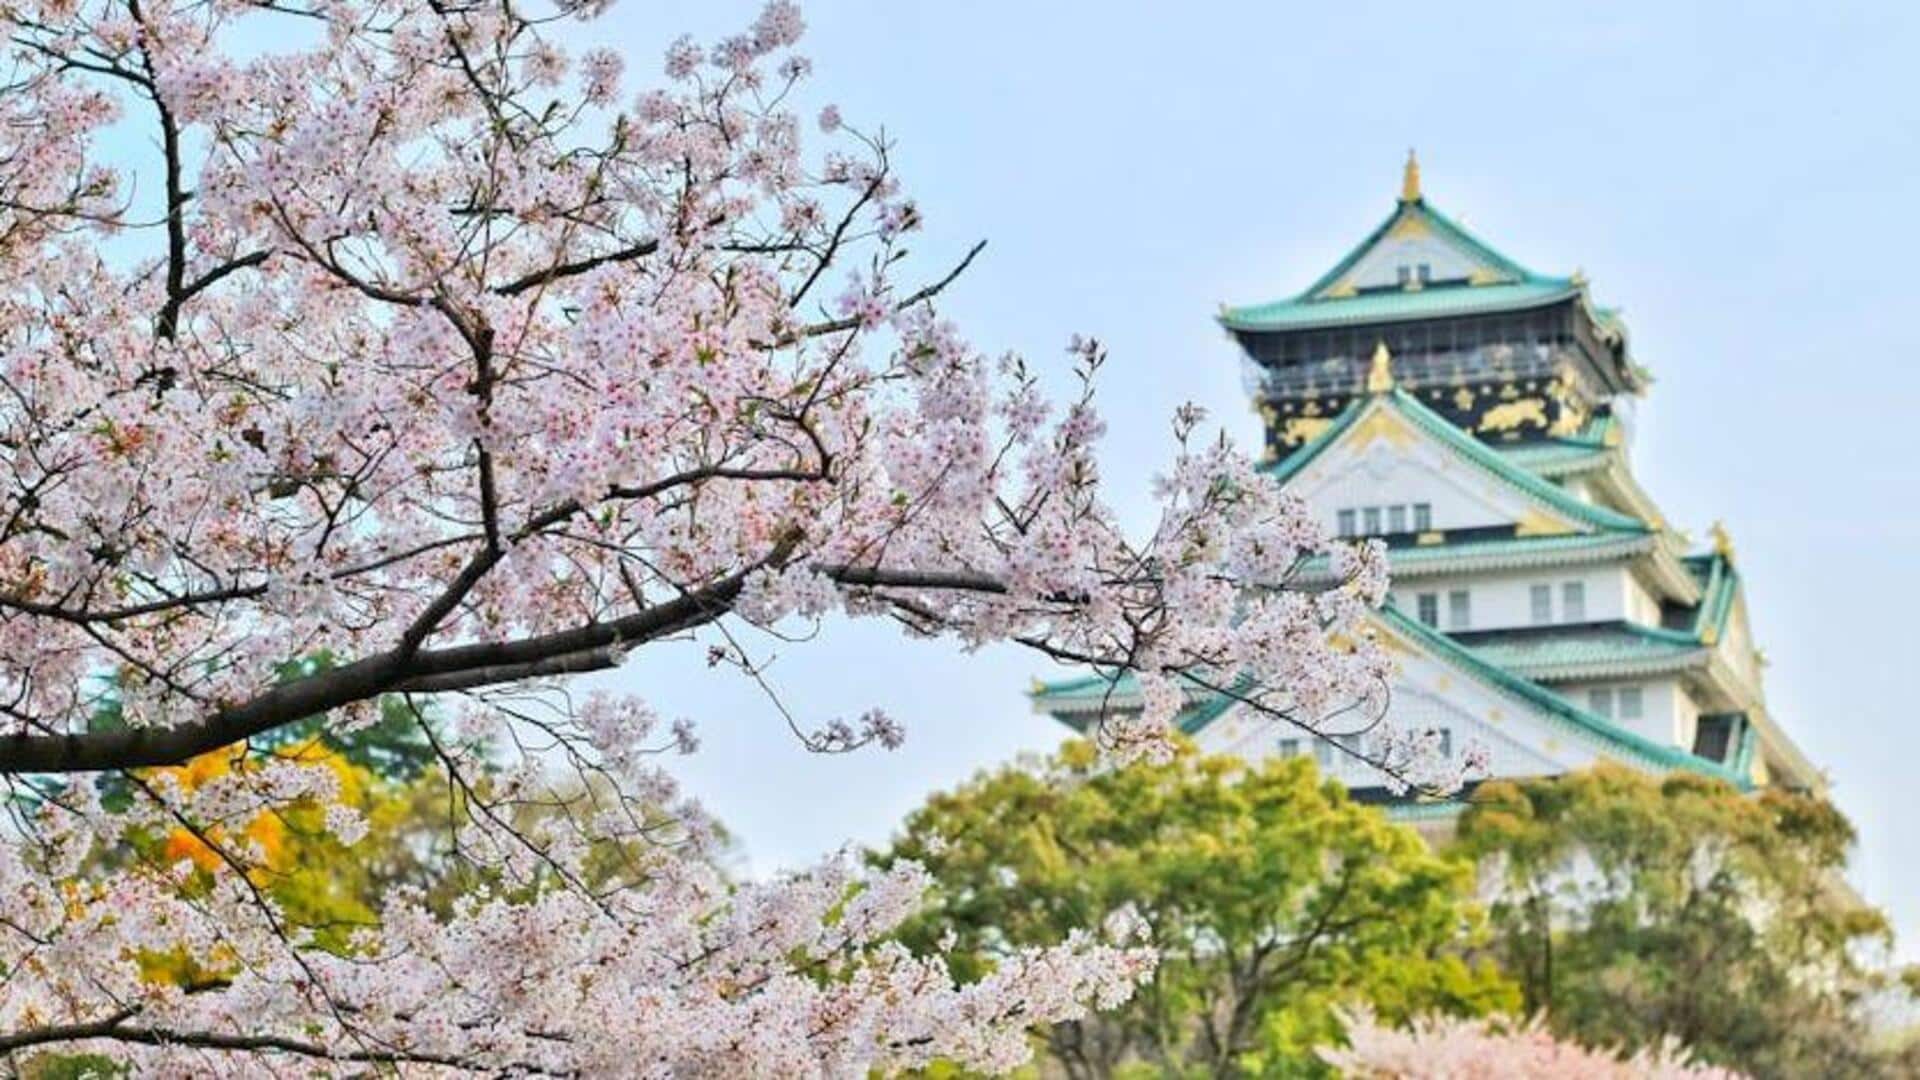 Witness Tokyo's best cherry blossom views with this guide